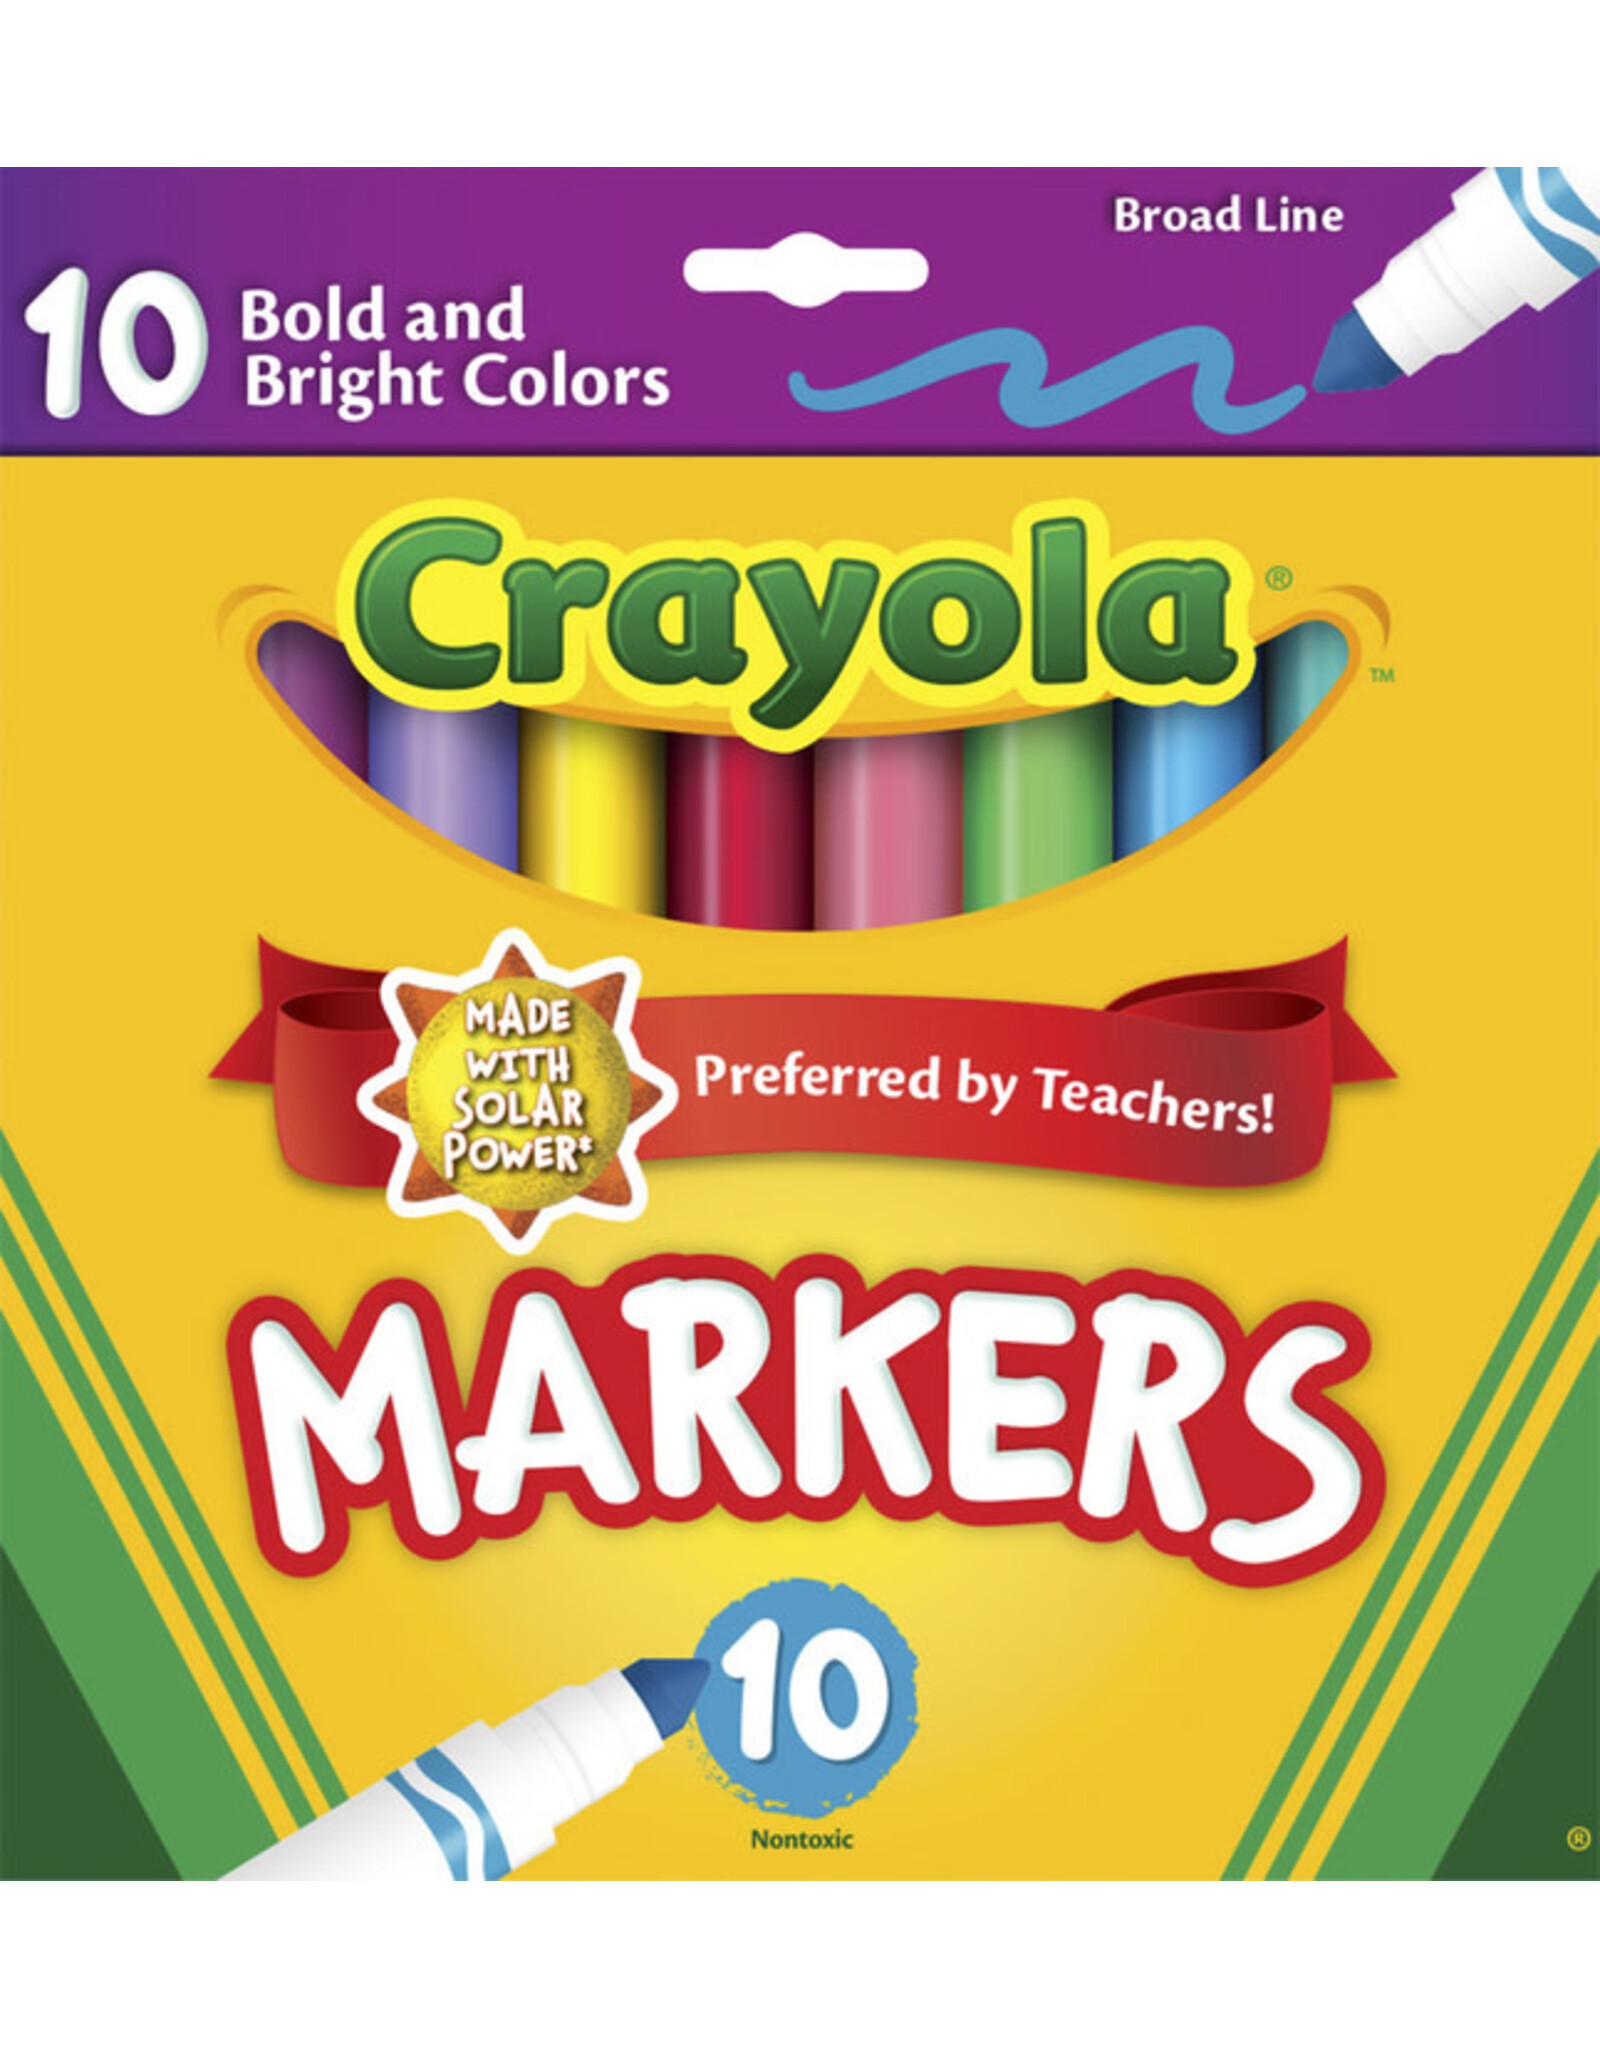 Bold and Bright colors 10 pack